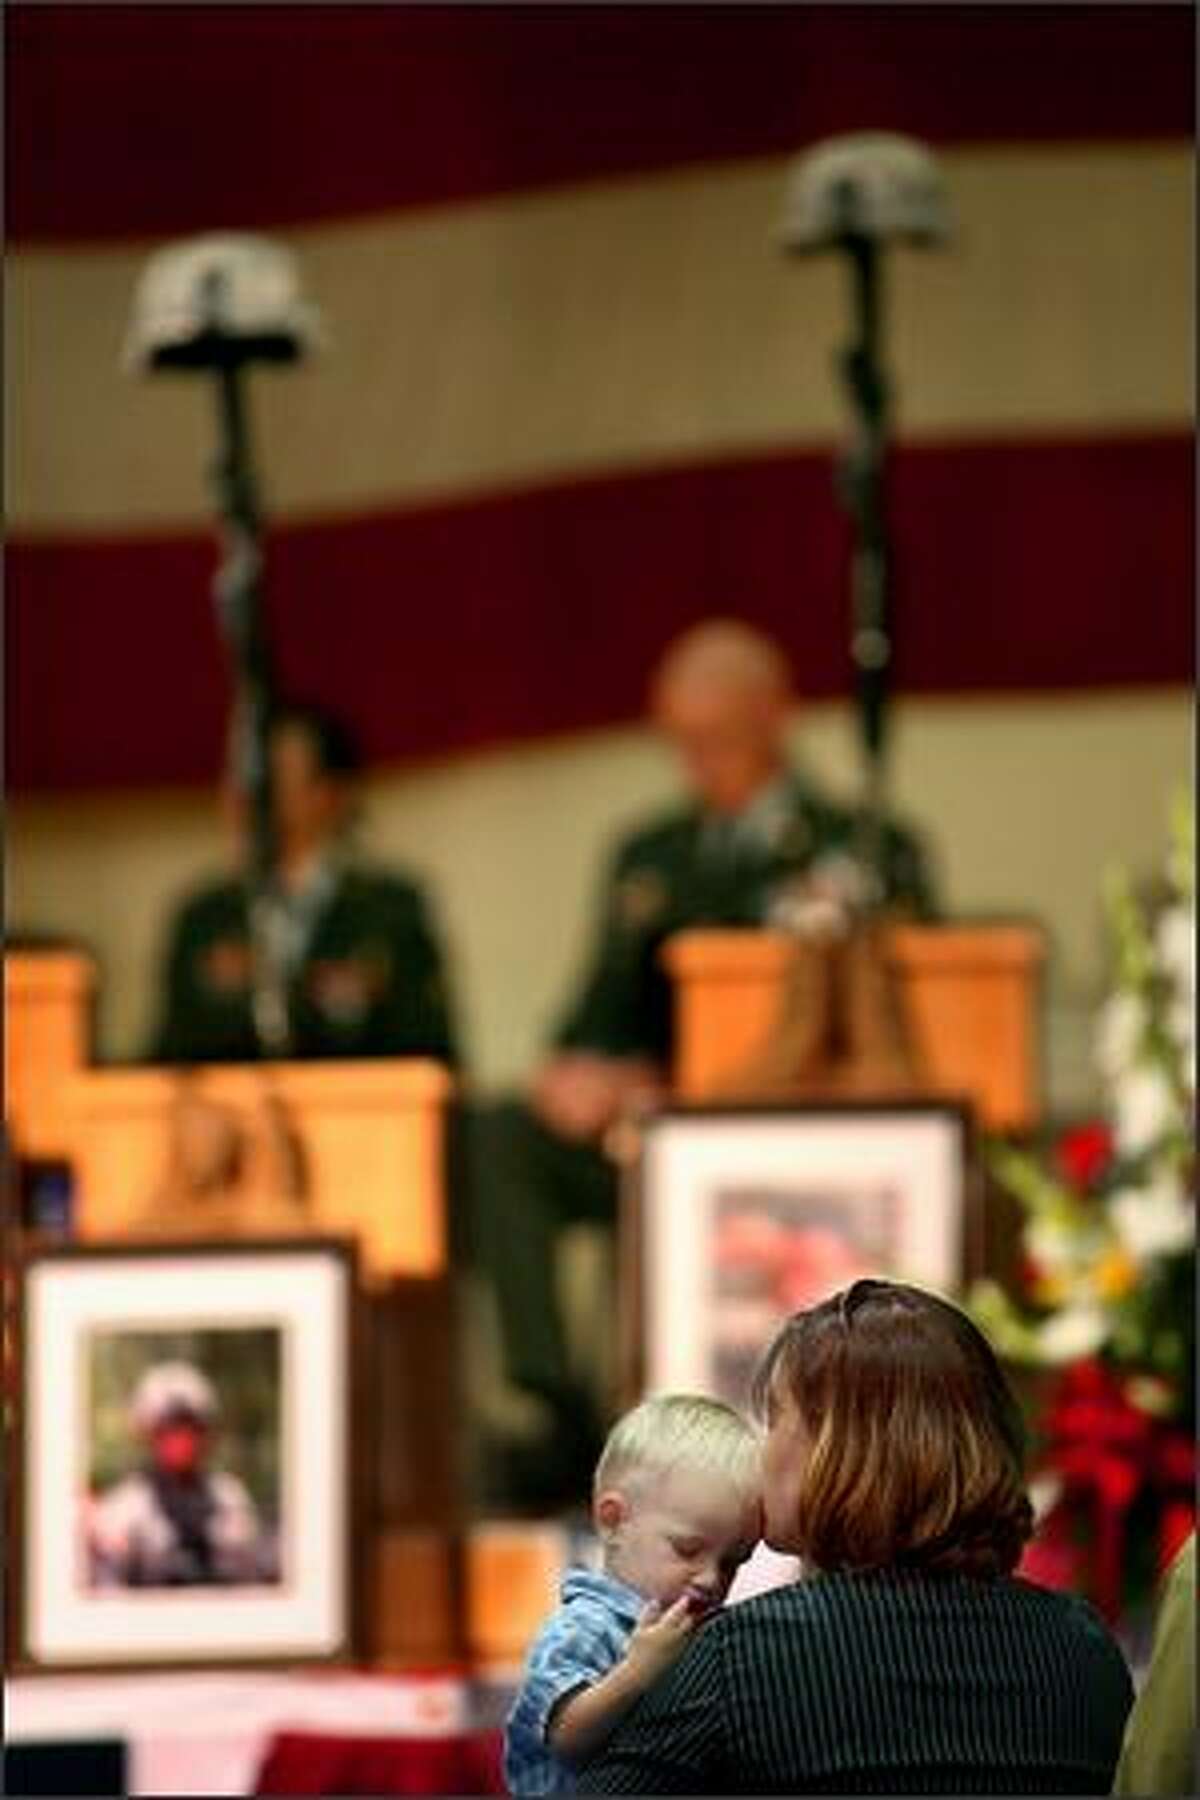 Brenda Long kisses her son Sage at the memorial for her husband and Sage's father SSG Brian Long on Thursday.